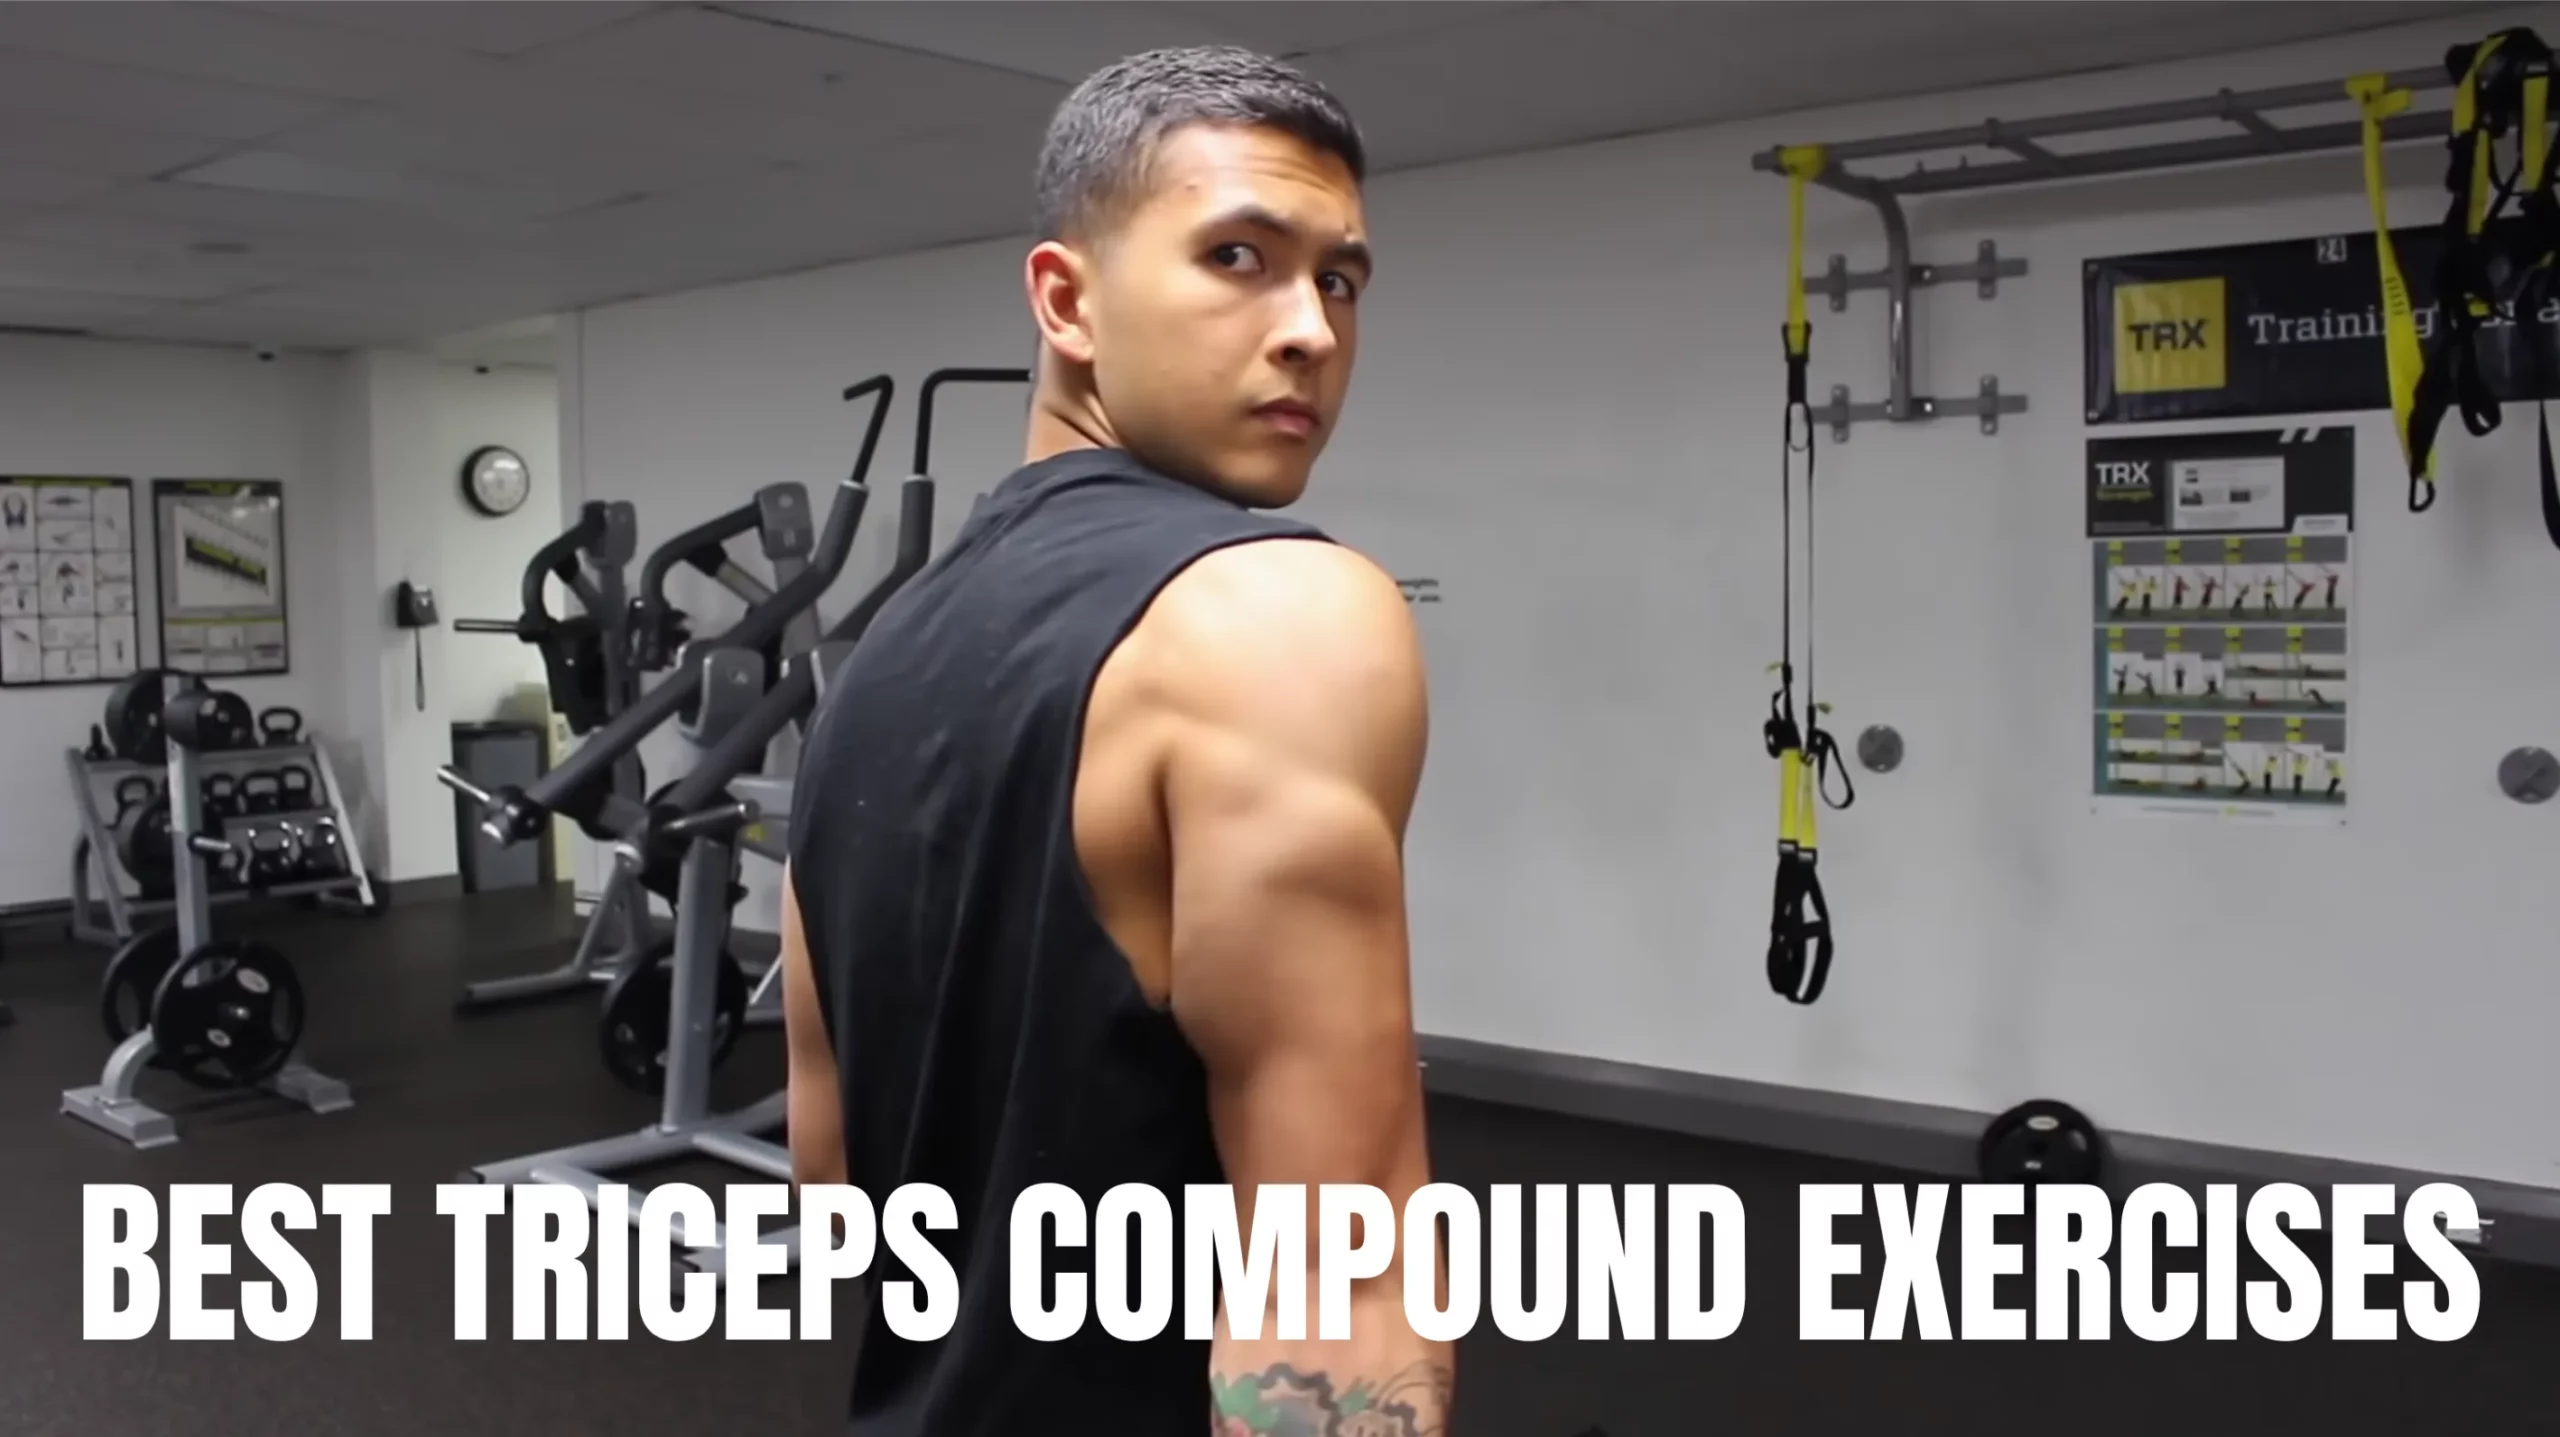 Best triceps compound exercises cover image